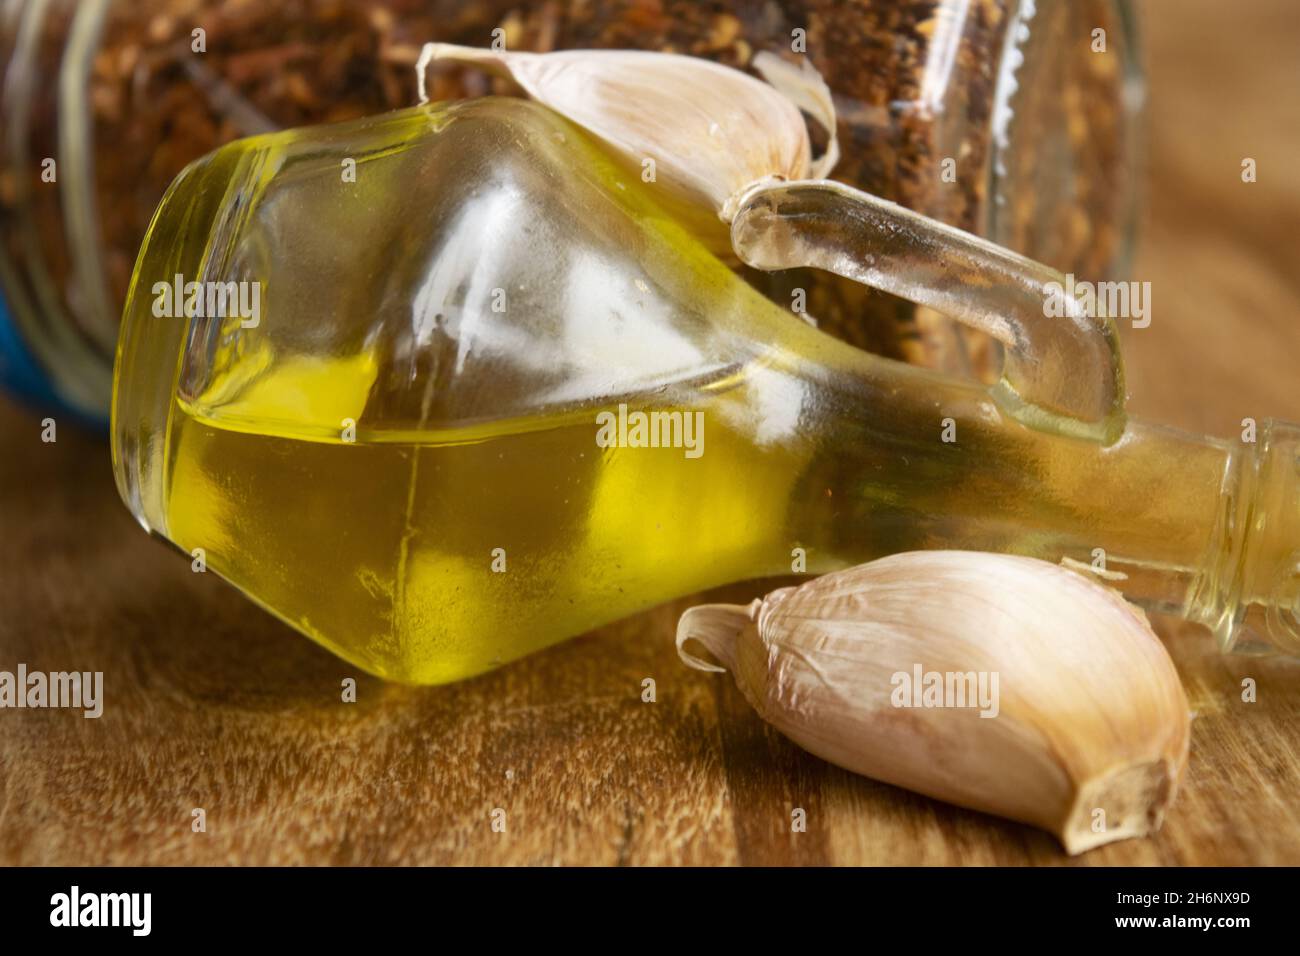 ingredients for pasta olive oil and garlic Stock Photo